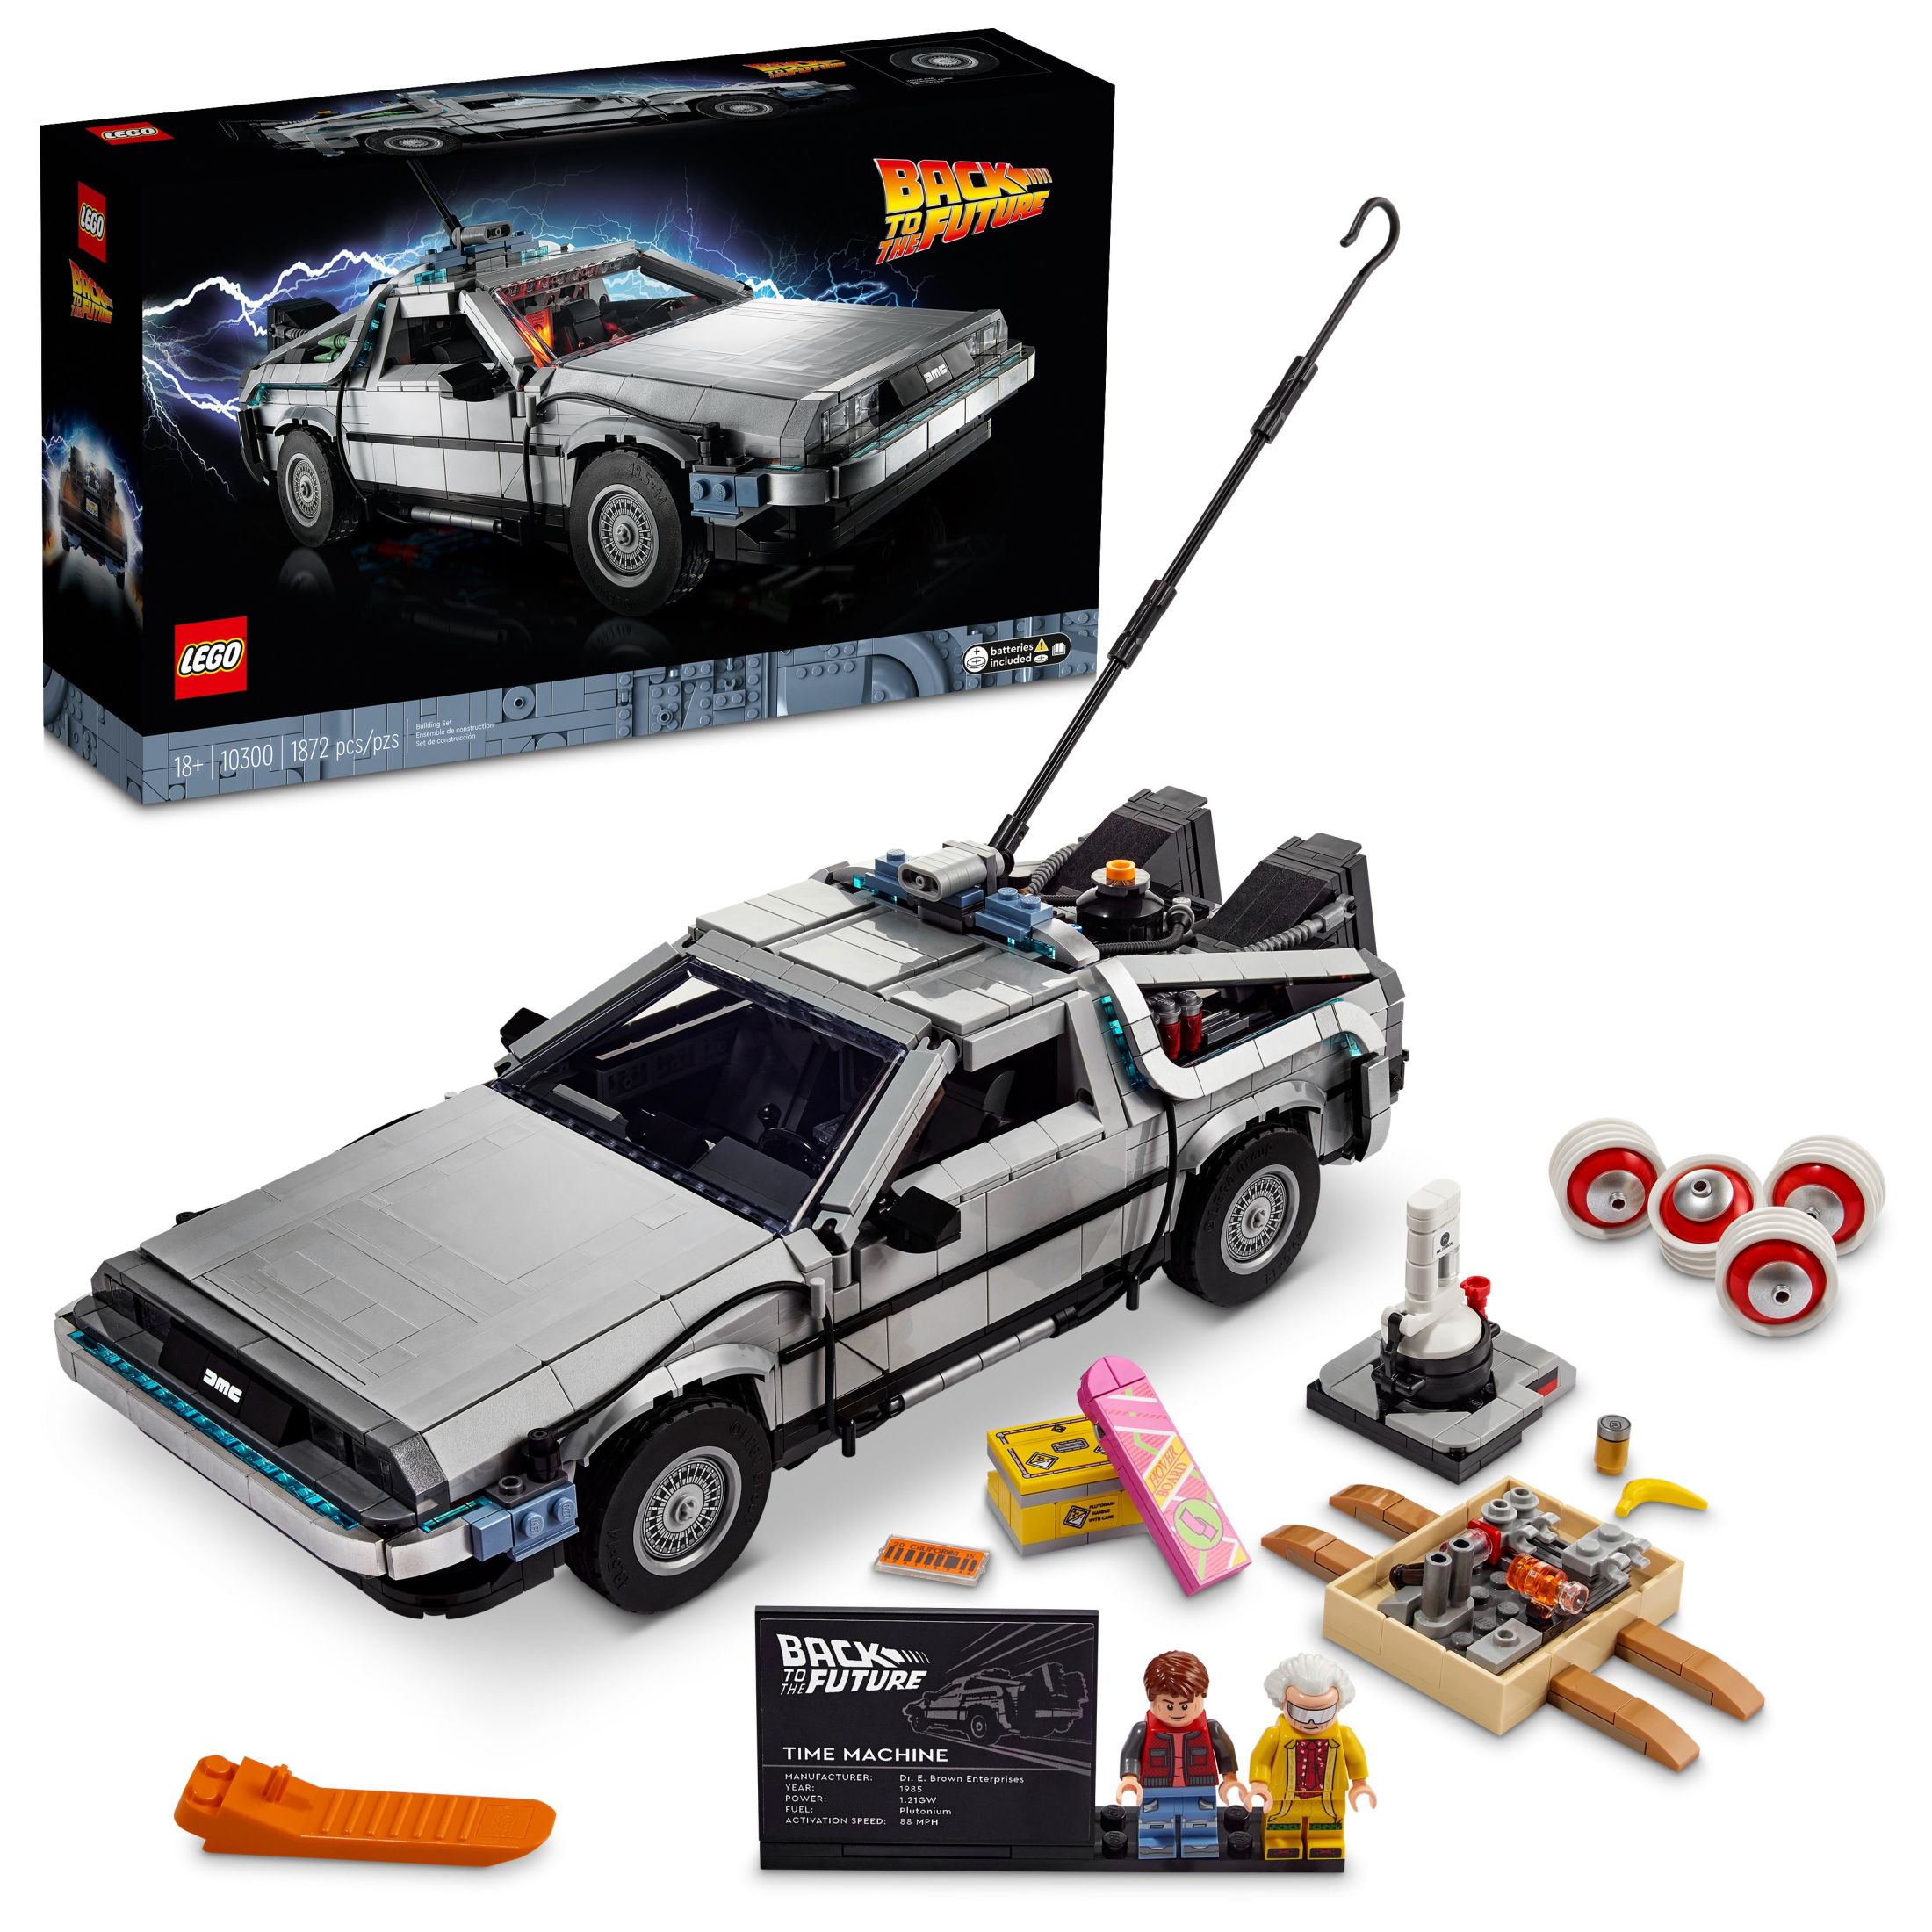 LEGO Icons Back to the Future Time Machine 10300, Model Car Building Kit, Based on the DeLorean from the Classic Movie - image 1 of 9